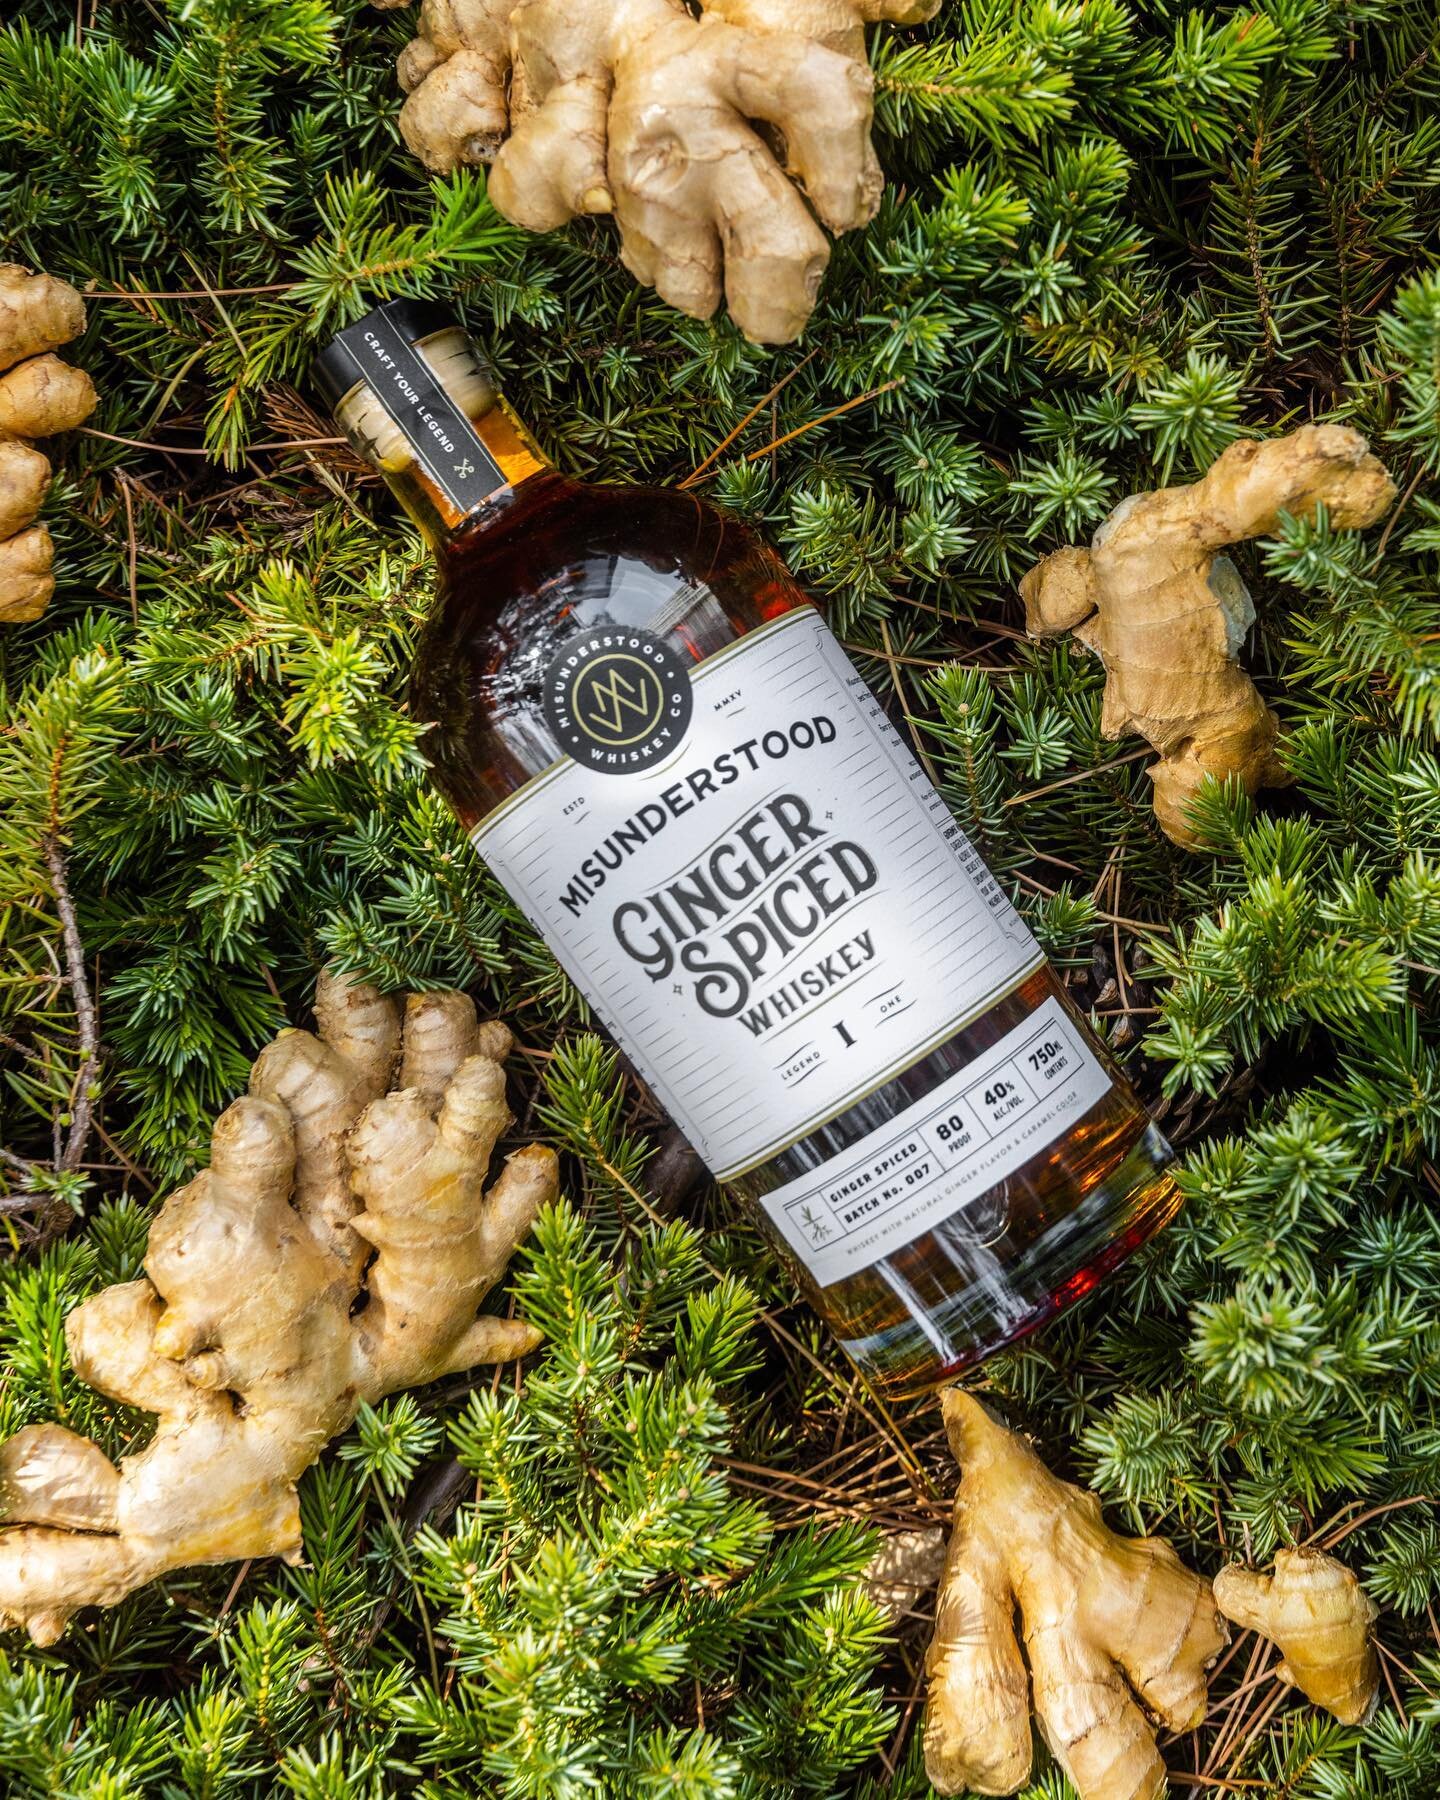 From the ground up, thats the root of Misunderstood. We proudly use real ginger when making our Ginger Whiskey. Happy Earth Day &amp; cheers to you!
.
.
.
.
.
.
#earthday #whiskey #earth #ginger #fresh #spice #earthday #drinks #whiskeygram #whiskeys 